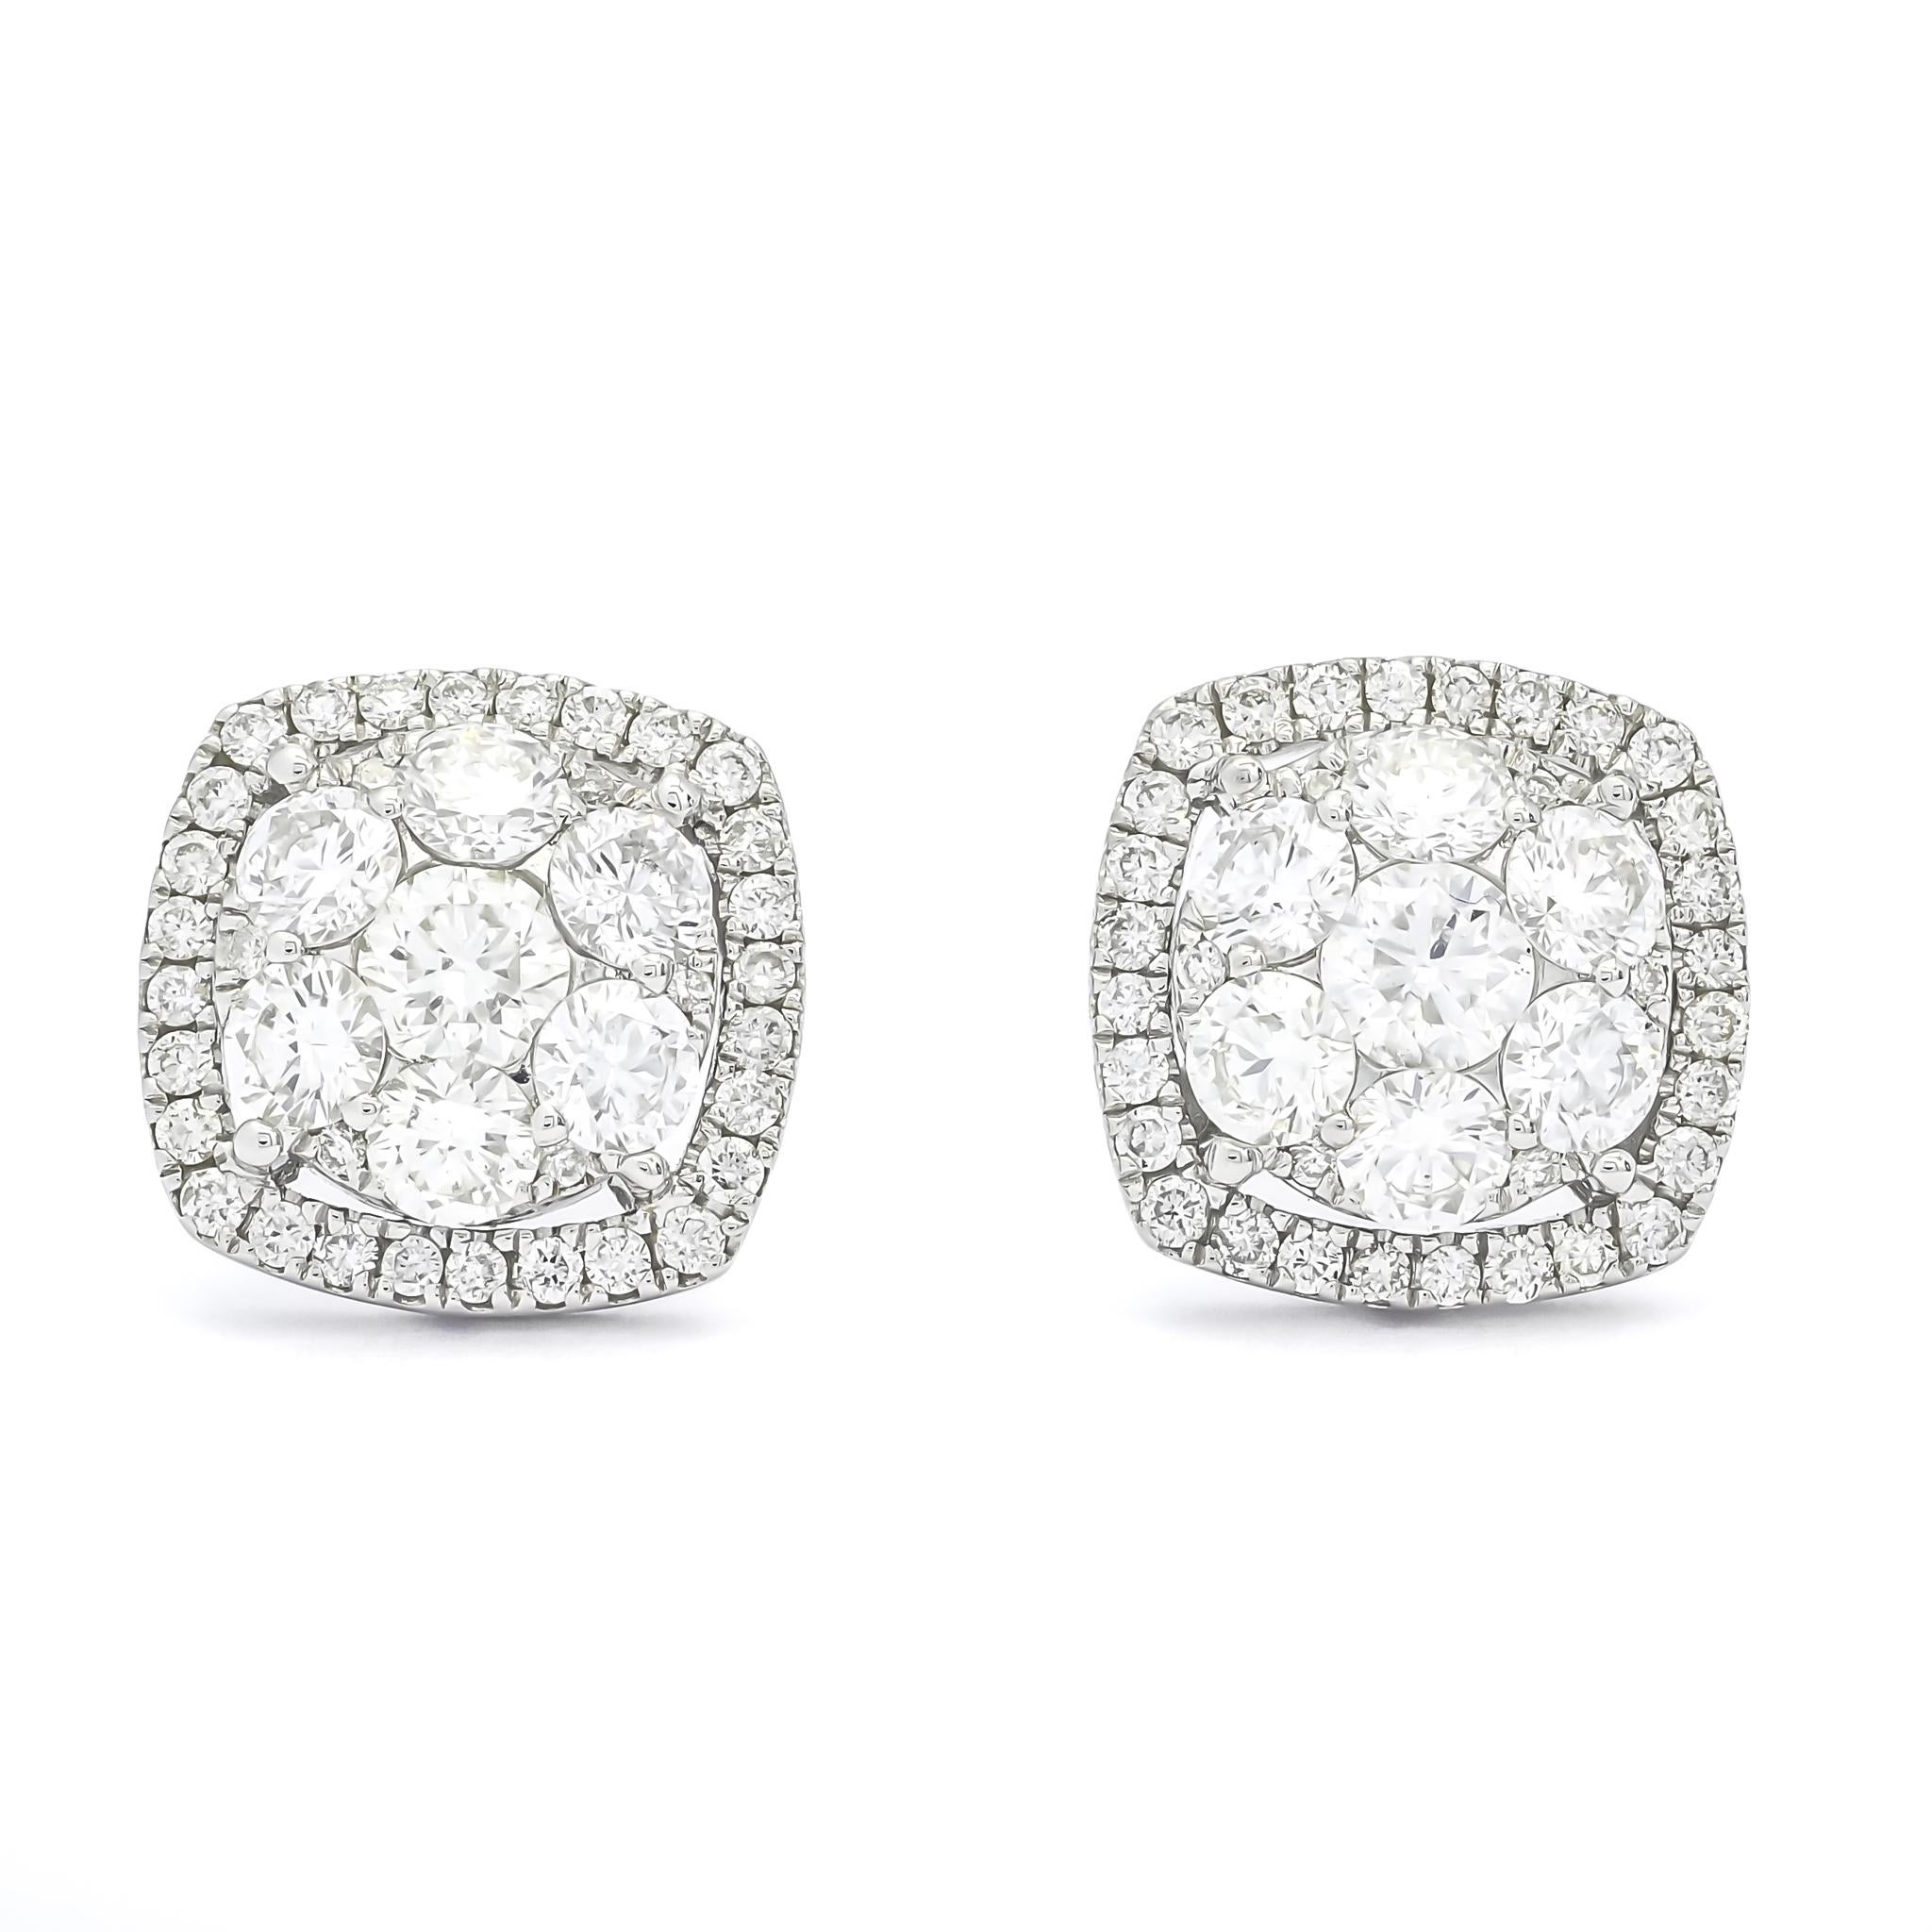 Prepare to step into a realm of sheer opulence and breathtaking beauty with our 1.69 Carat Natural Diamond 18KT White Gold Square Cluster Halo Stud Earrings. These extraordinary earrings are the epitome of timeless elegance, combining the radiance